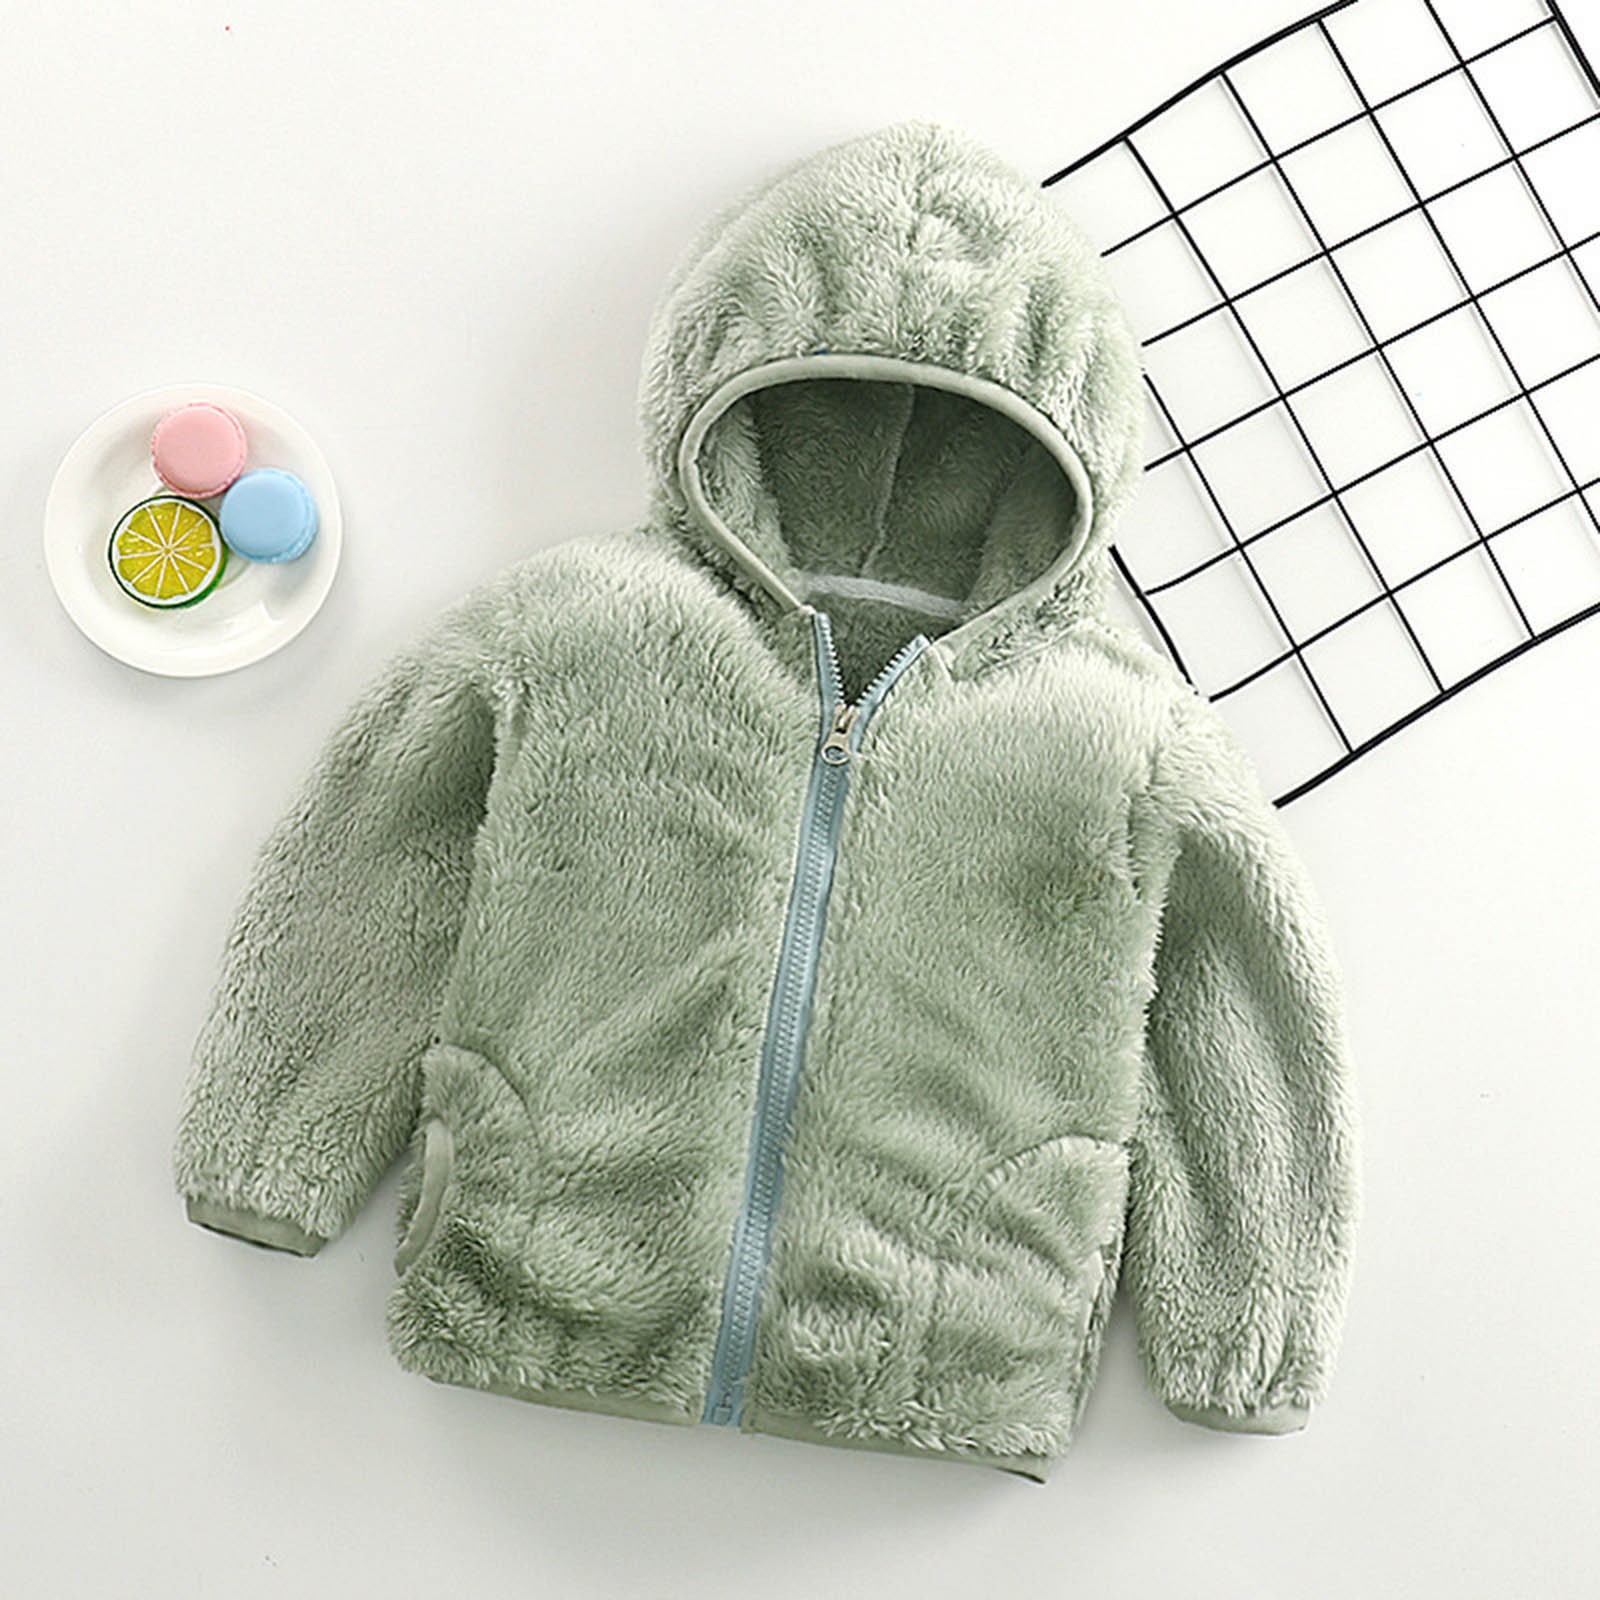 Dezsed Toddler Fleece Jacket Clearance Toddler Baby Boys Girls Solid Color Plush Cute Winter Keep Warm Hoodie Coat Jacket 6-7 Years Green - image 2 of 6